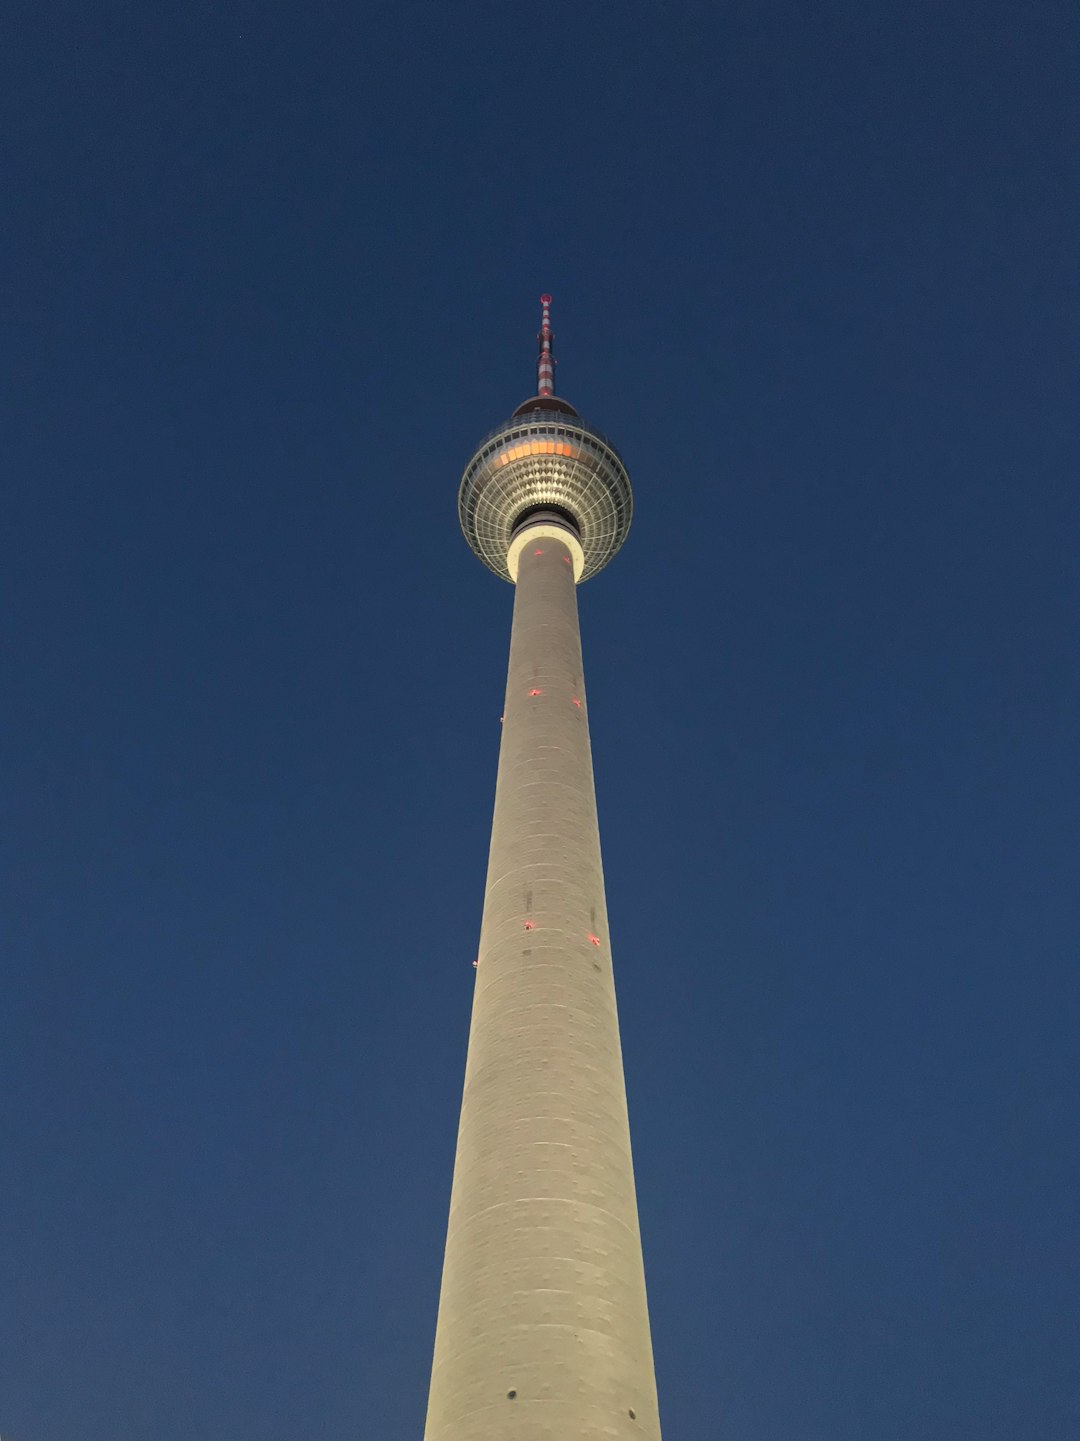 Travel Tips and Stories of Fernsehturm Berlin in Germany